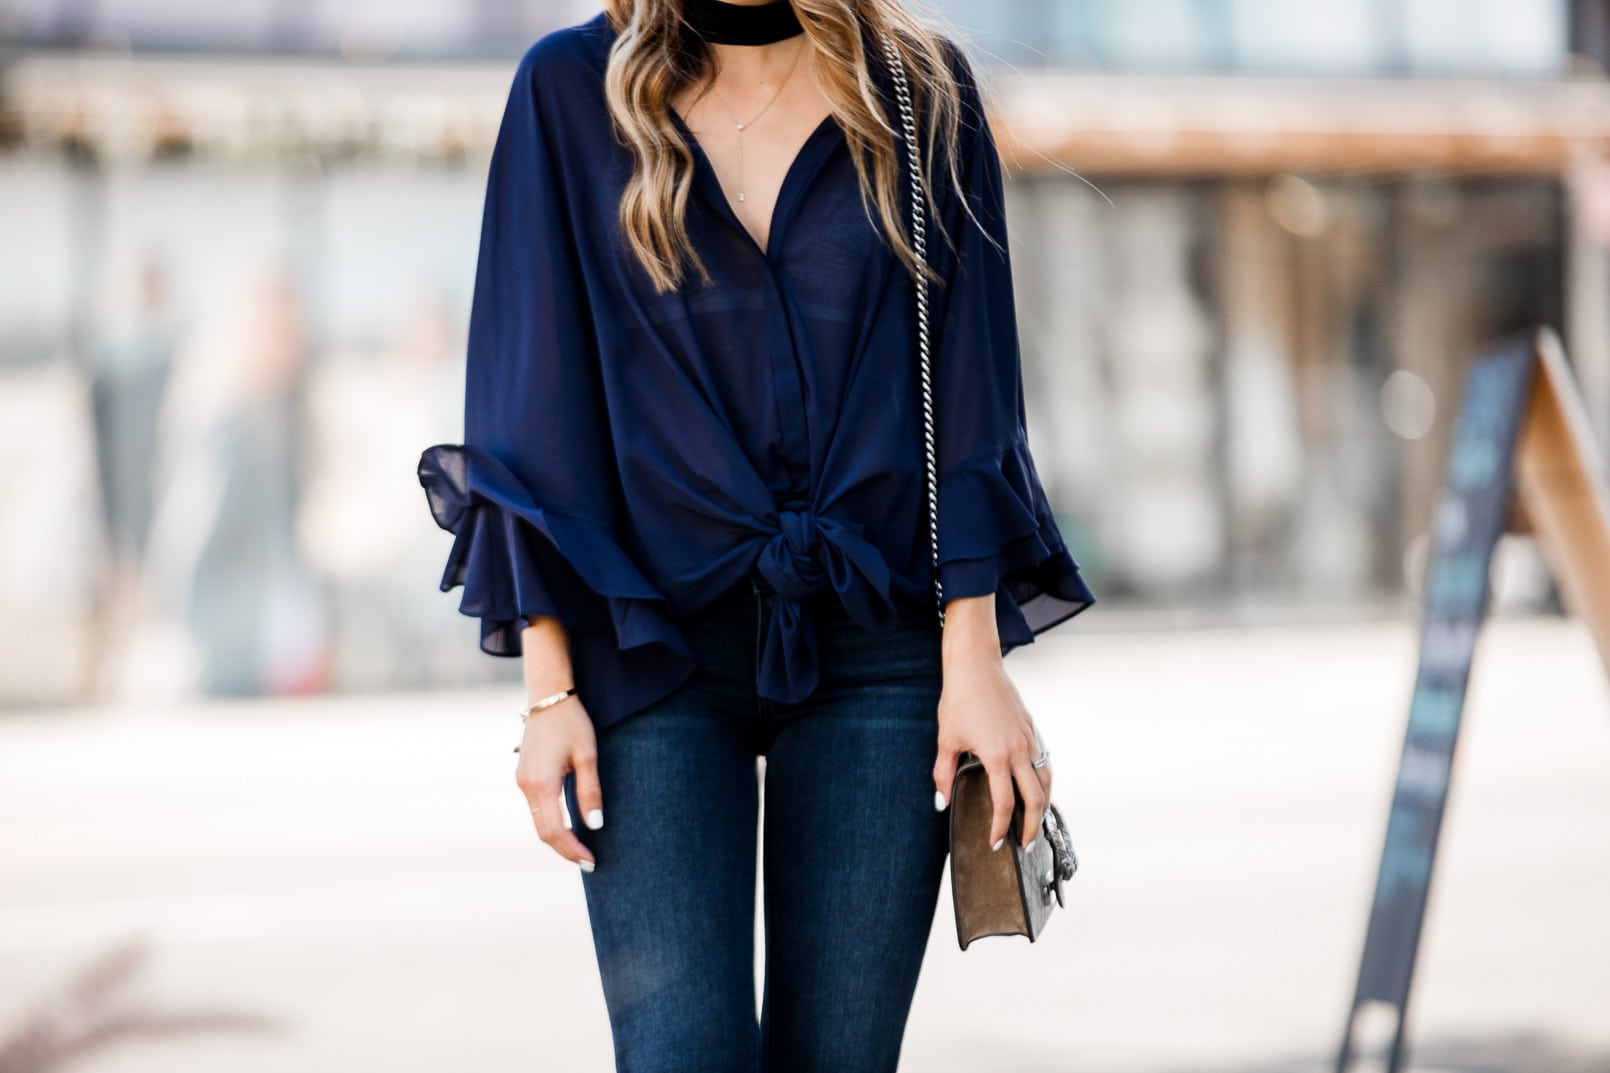 How to style a Ruffle Top | The Girl From Panama @pamhetlinger